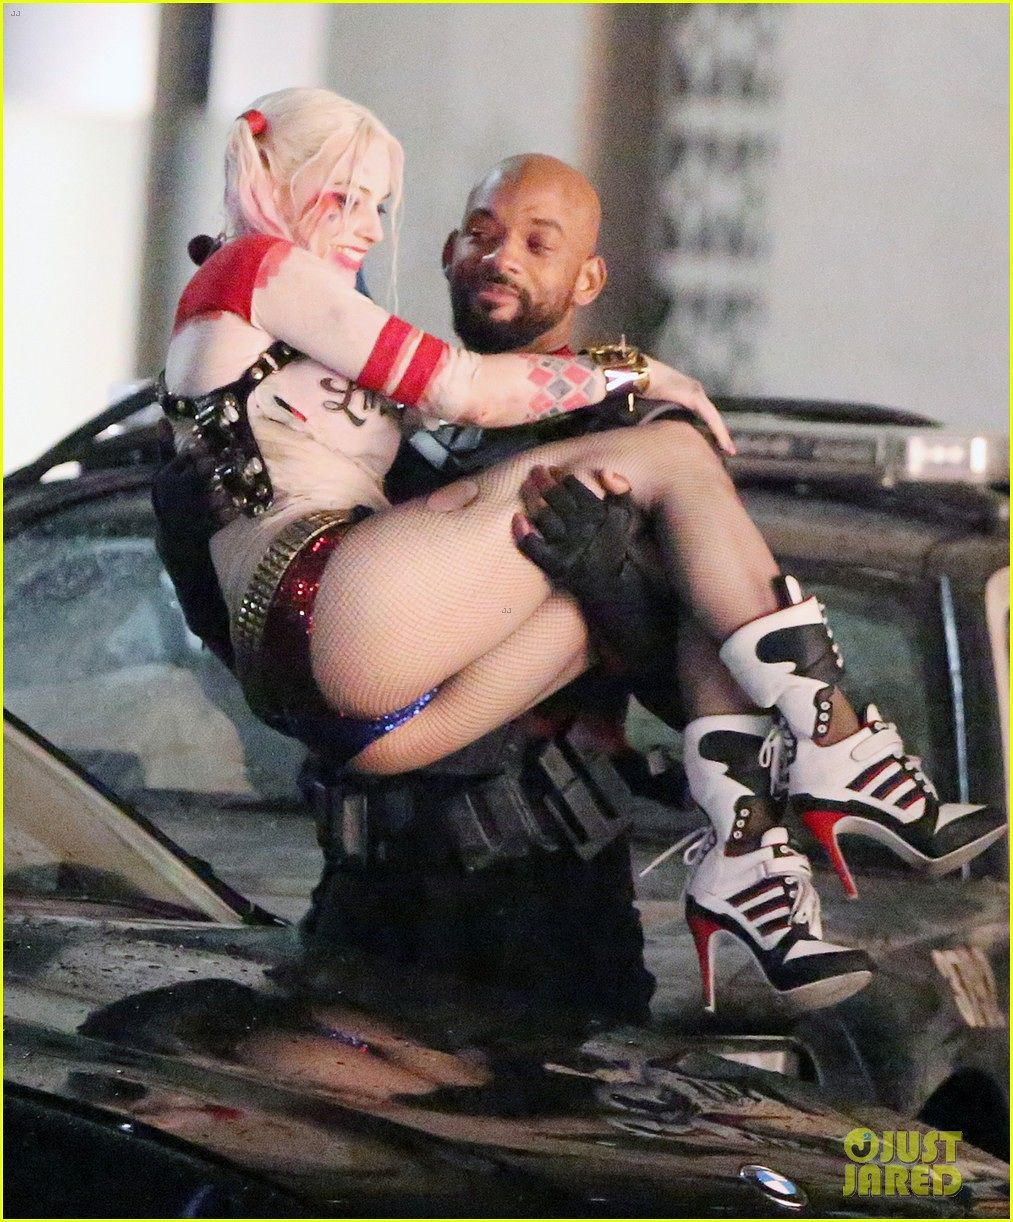 do-these-suicide-squad-pictures-reveal-harley-quinn-leaving-the-joker-398919.jpg